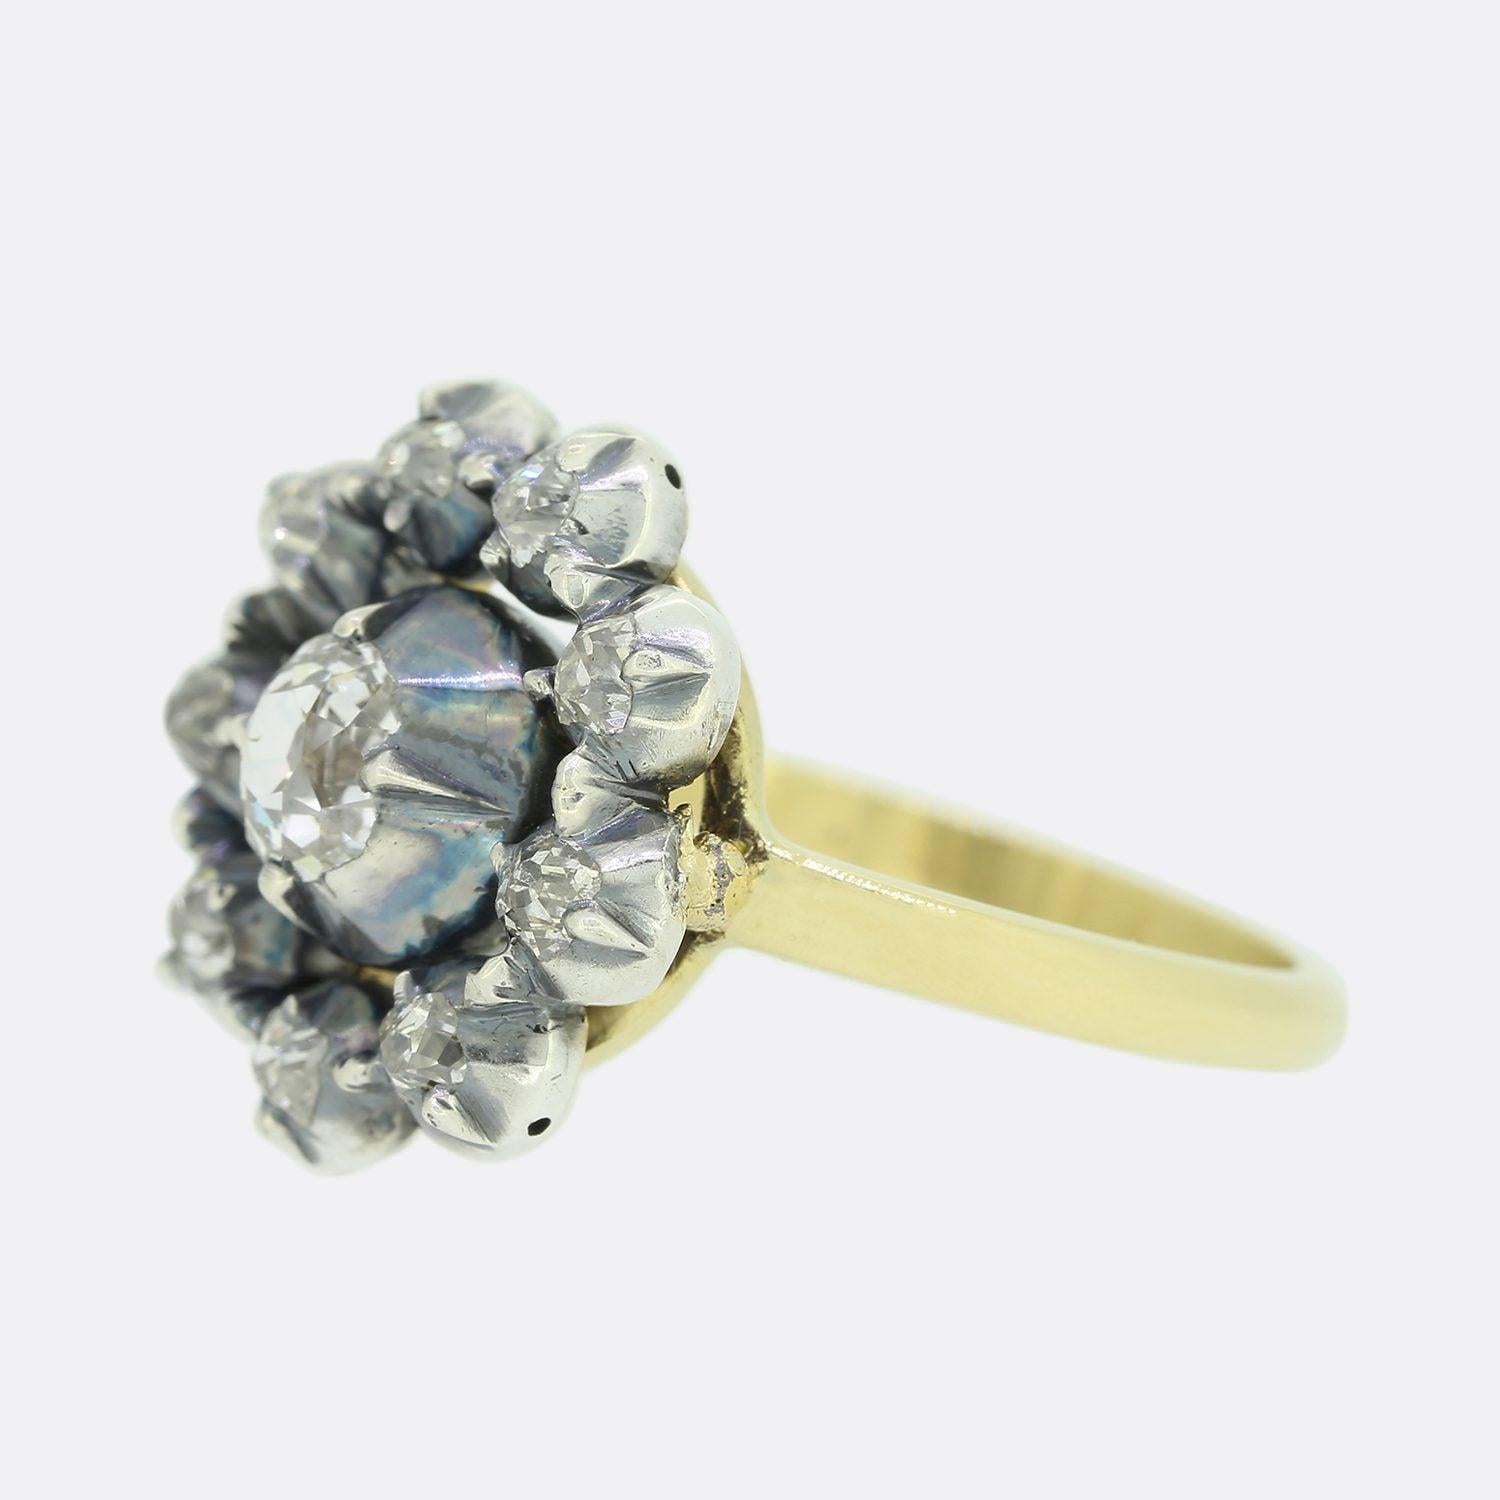 This is a beautiful, 18ct yellow gold diamond cluster ring. The ring features a central old mine cut diamond and is surrounded by nine smaller old cut diamonds in a cluster style. The diamonds are silver set in cut down collet mounts and this leads